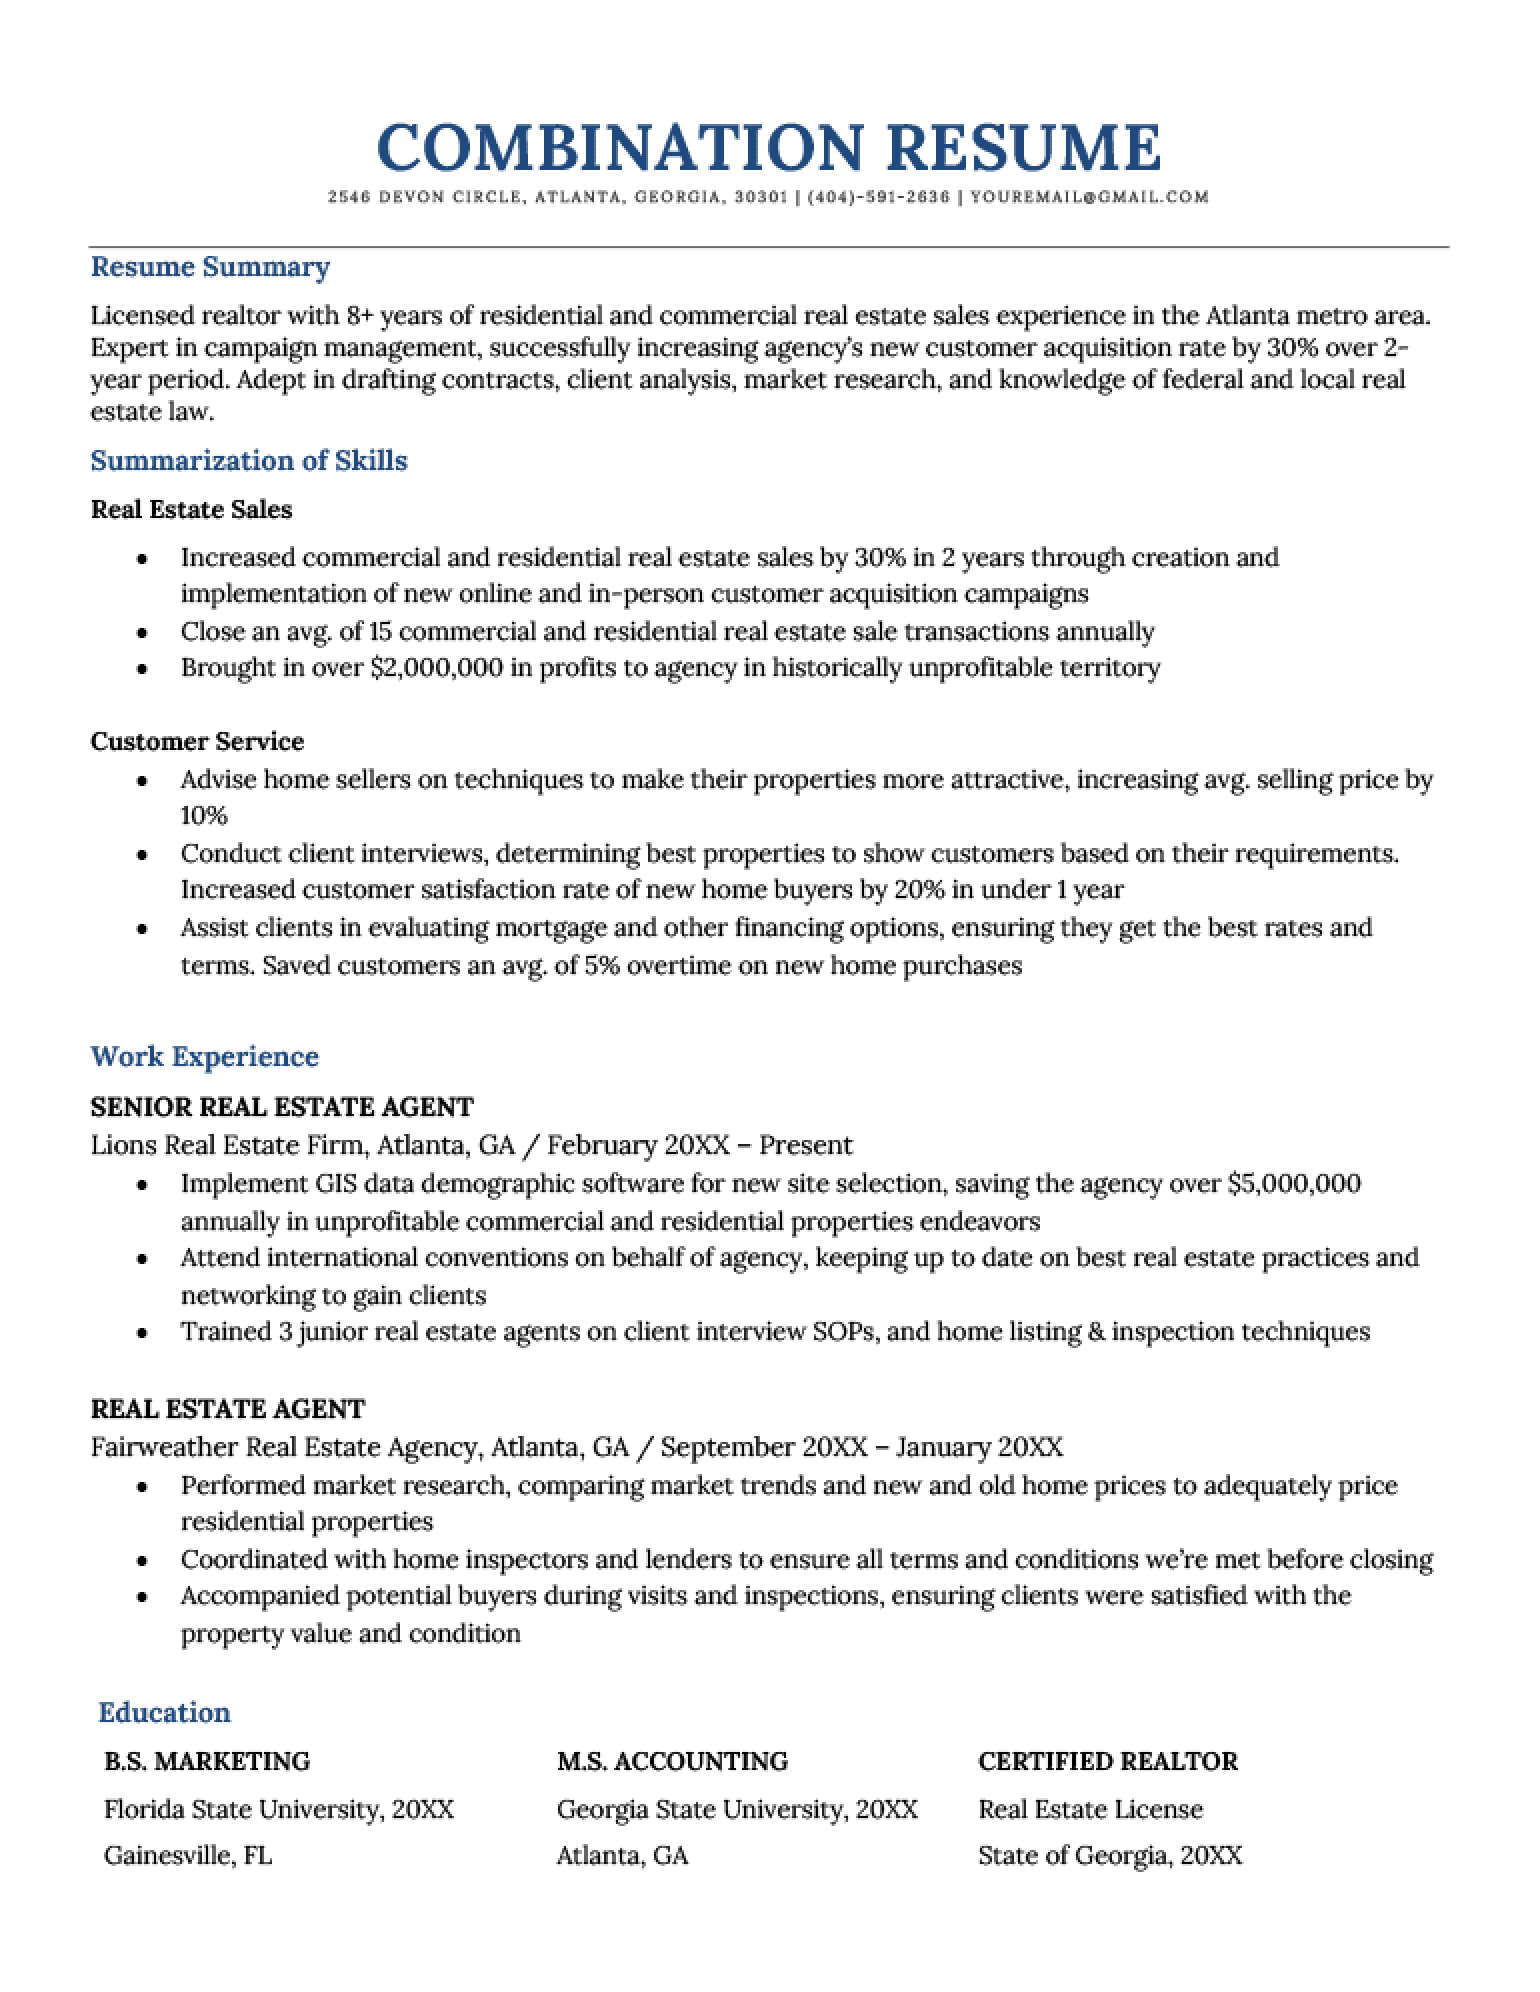 A combination resume example from a realtor